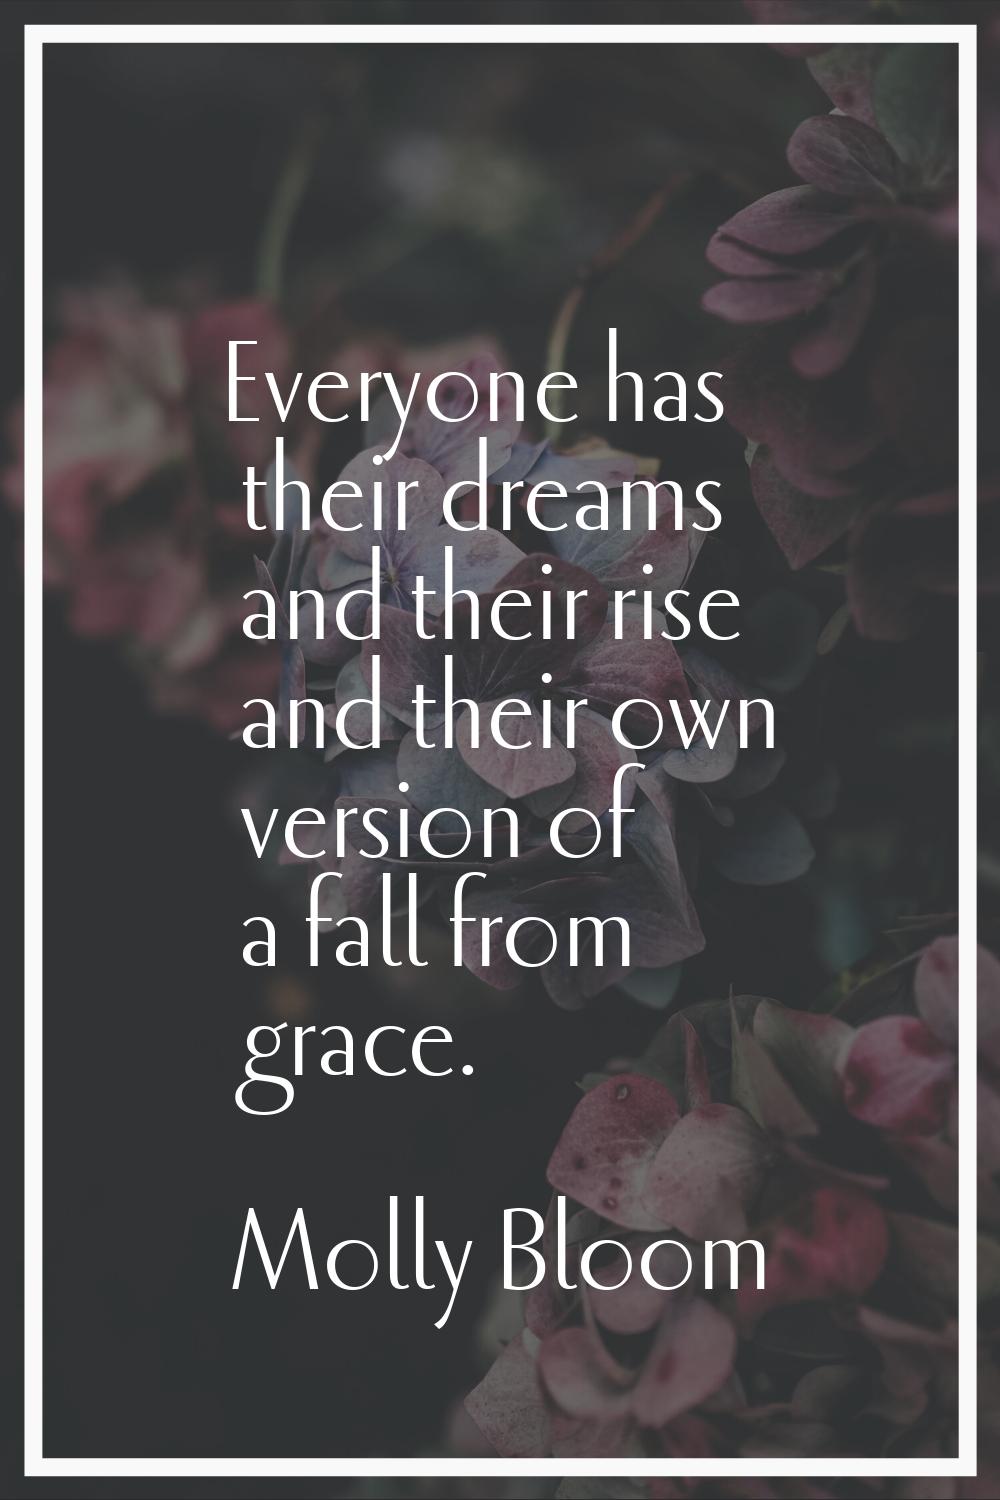 Everyone has their dreams and their rise and their own version of a fall from grace.